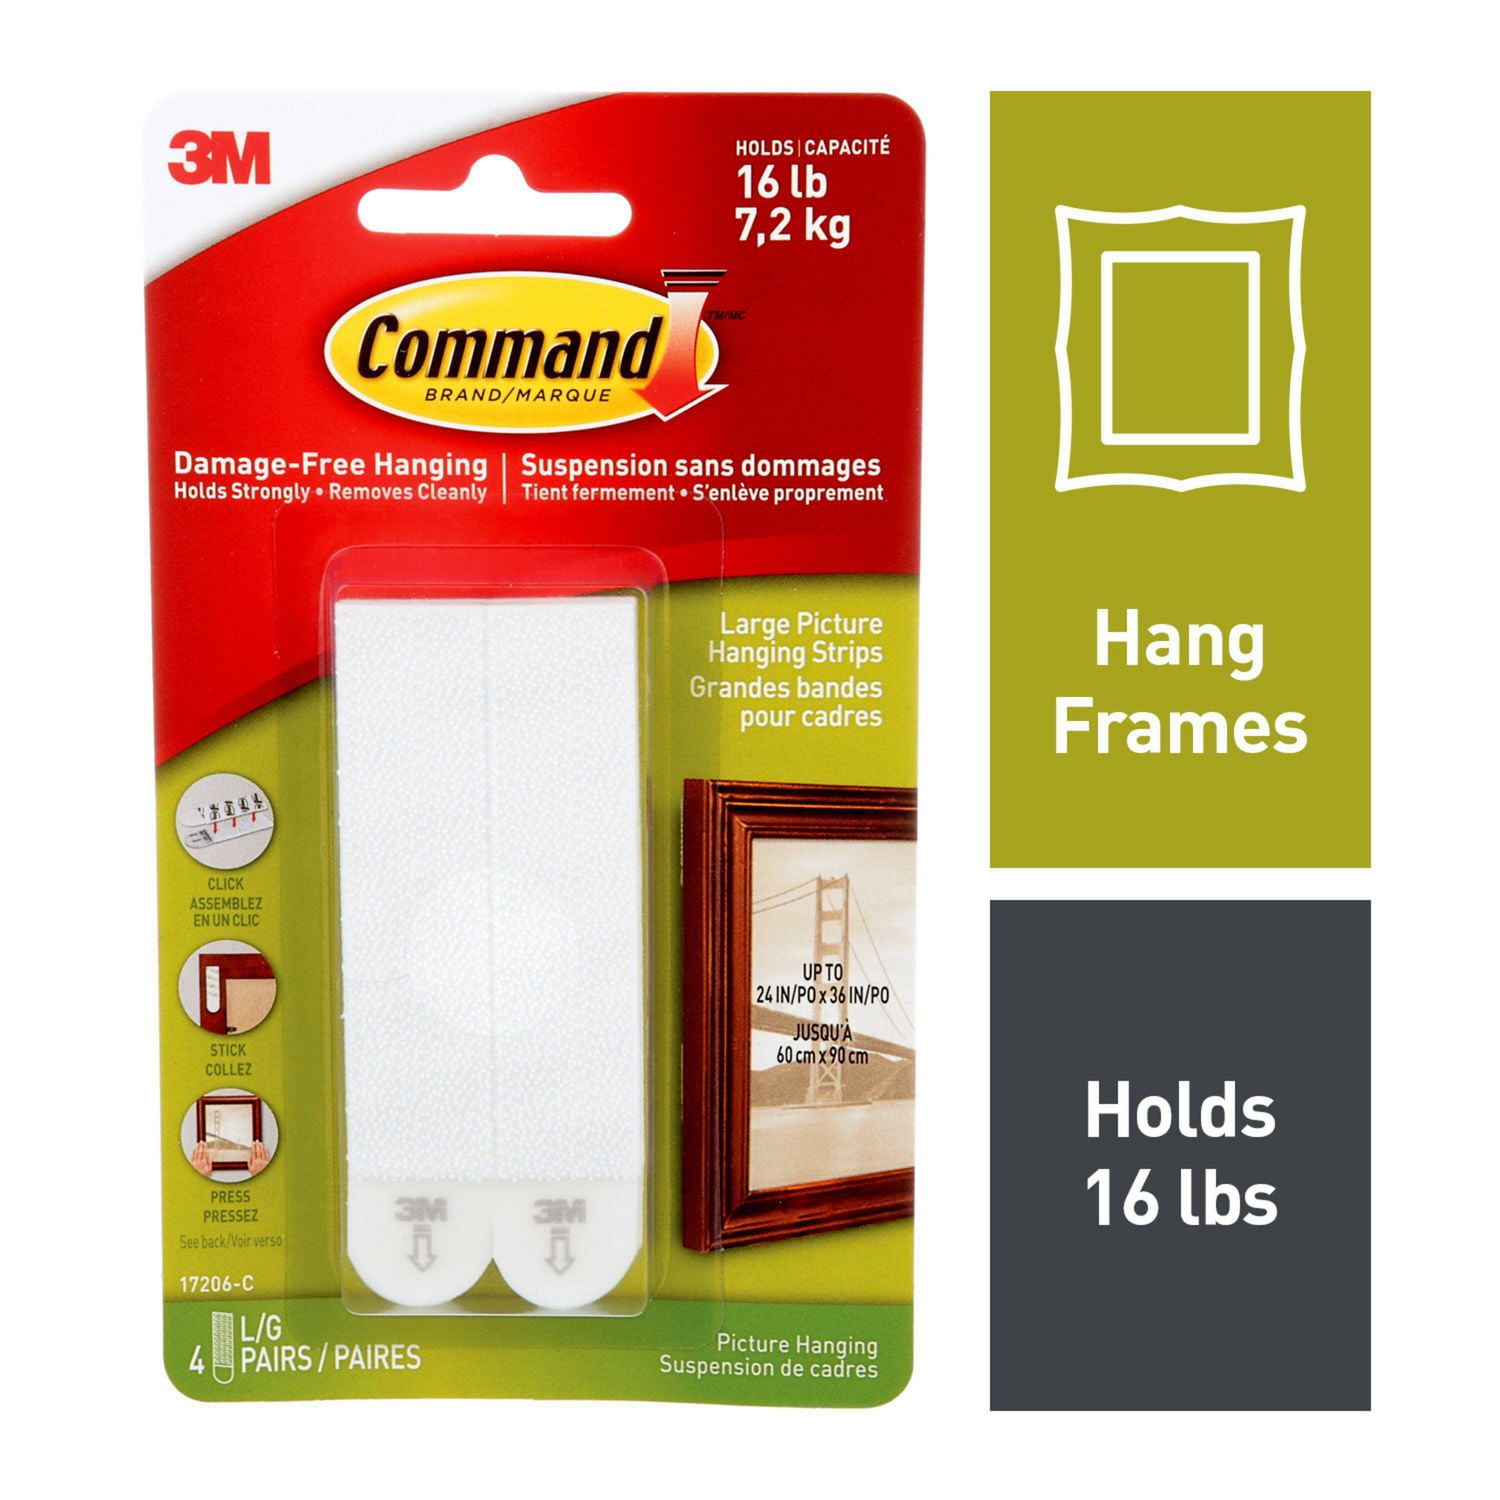 Command™ Picture Hanging Strips 17206-C, White, Large, 8 Strips